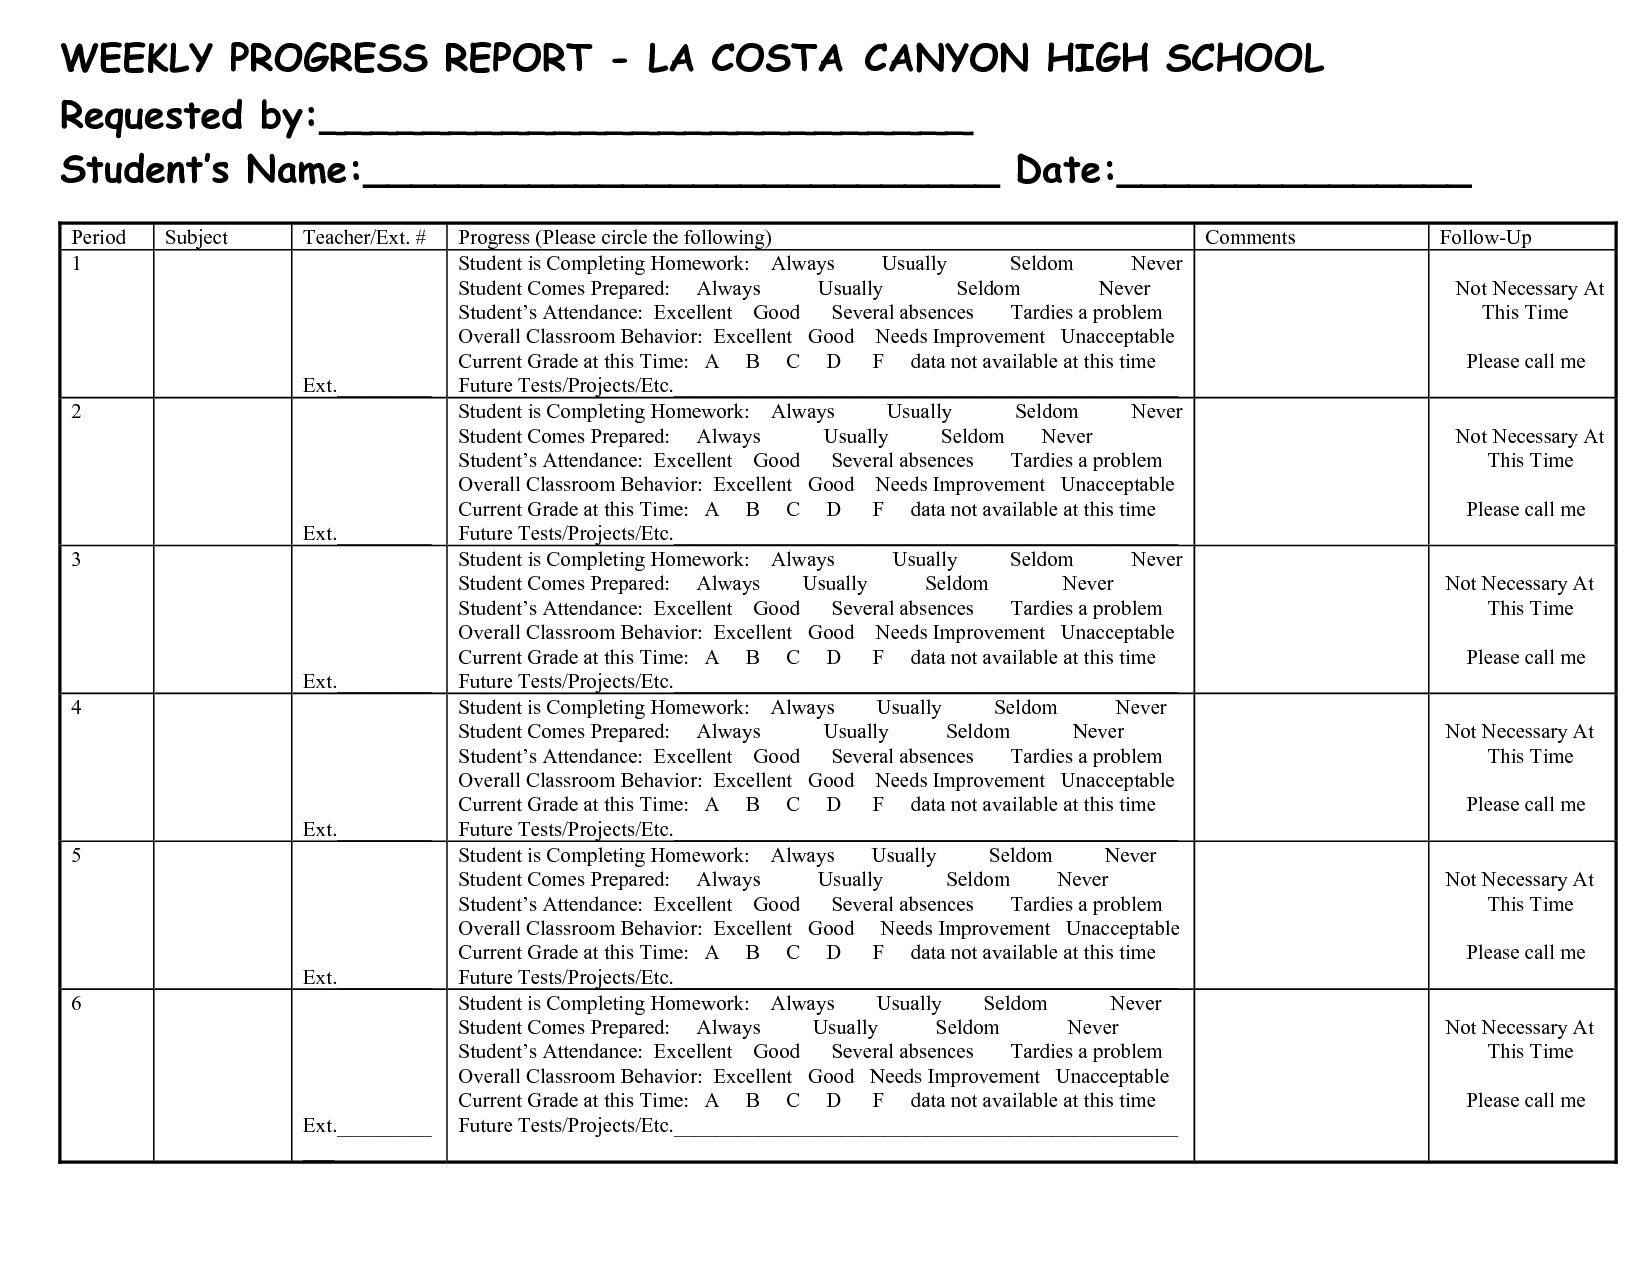 Report Template For Students ] – 5 Weekly Progress Report With High School Progress Report Template